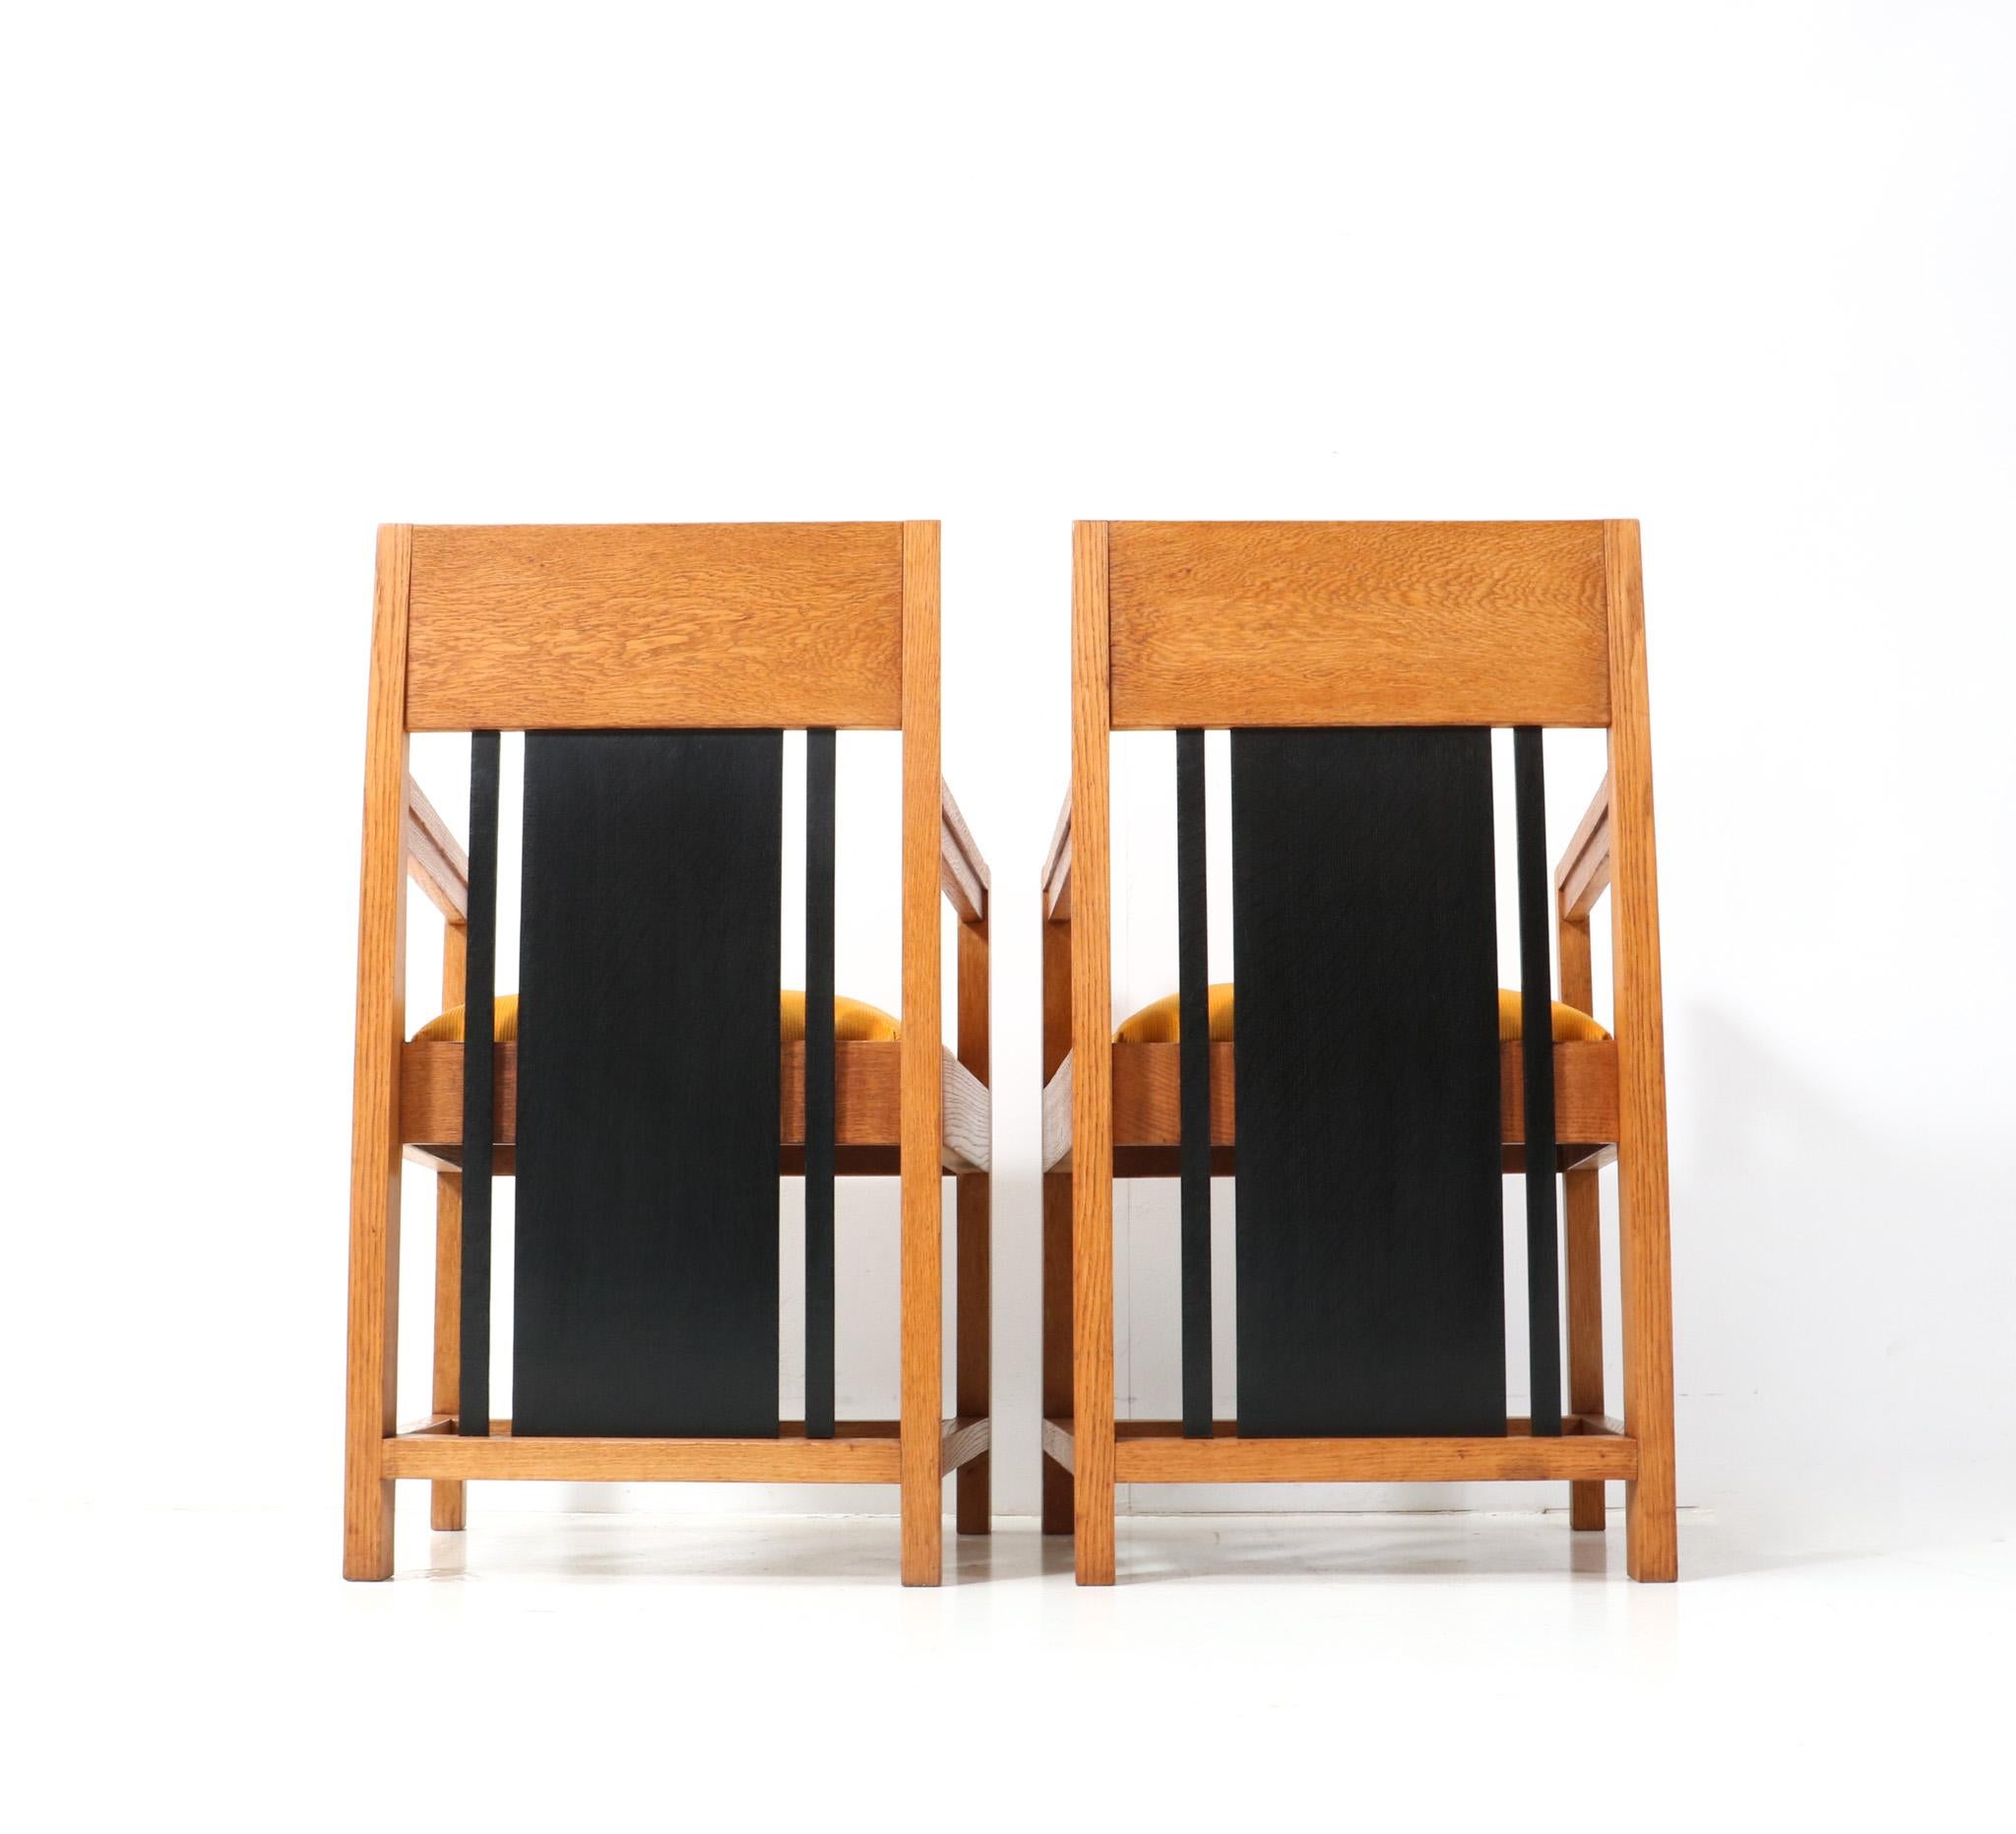 Two Oak Art Deco Modernist High Back  Armchairs by Cor Alons, 1927 For Sale 1